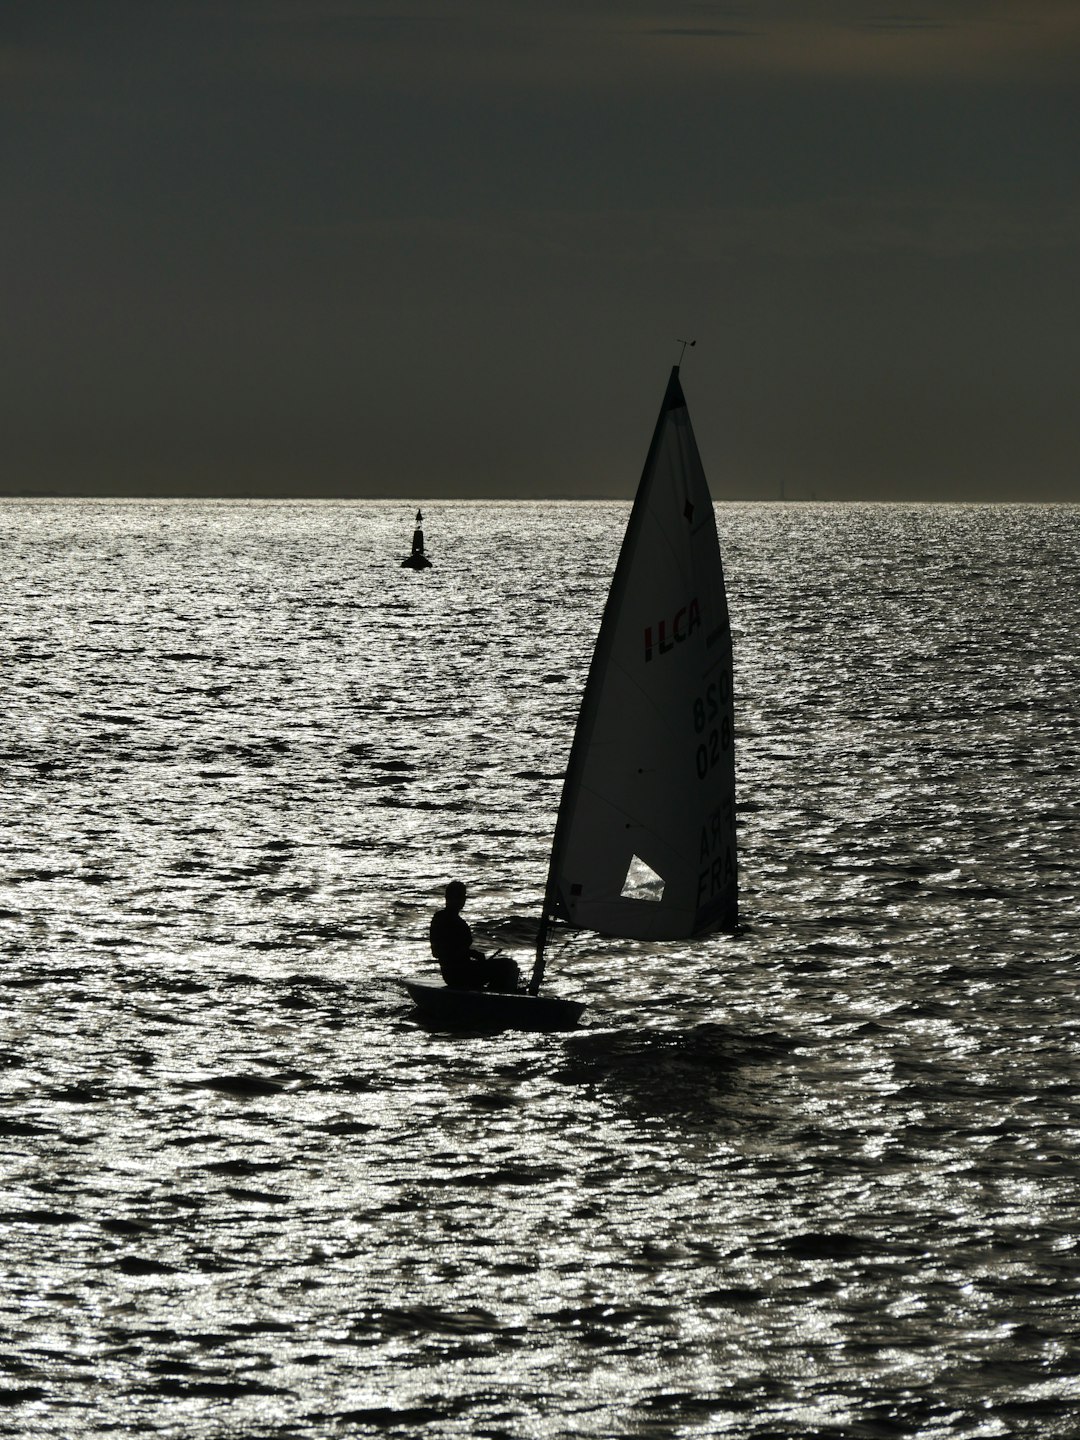 silhouette of person riding on sailboat on sea during daytime